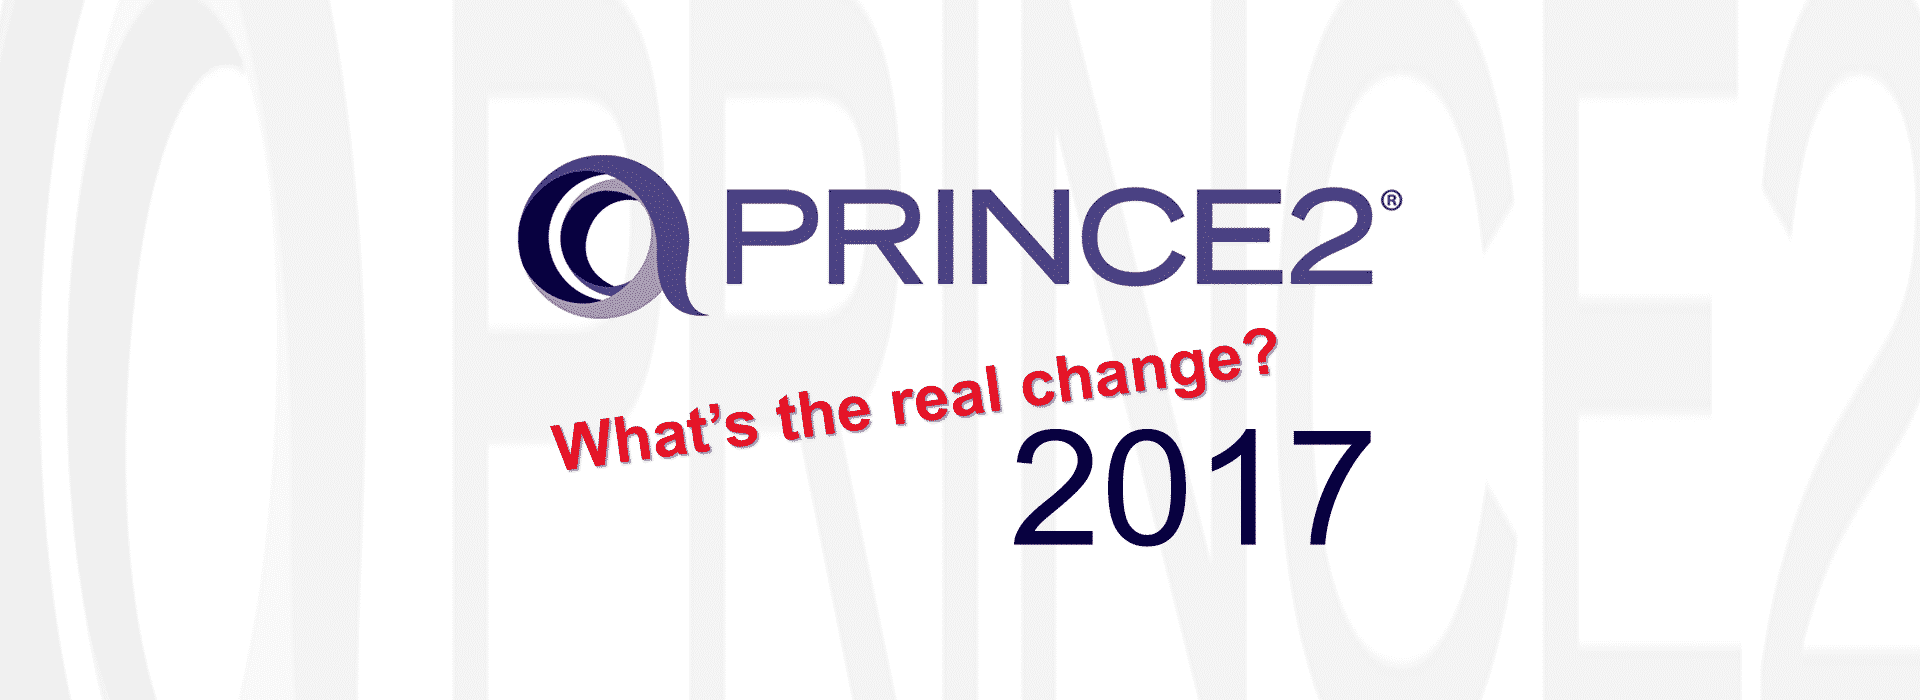 What has changed in PRINCE2 2017?